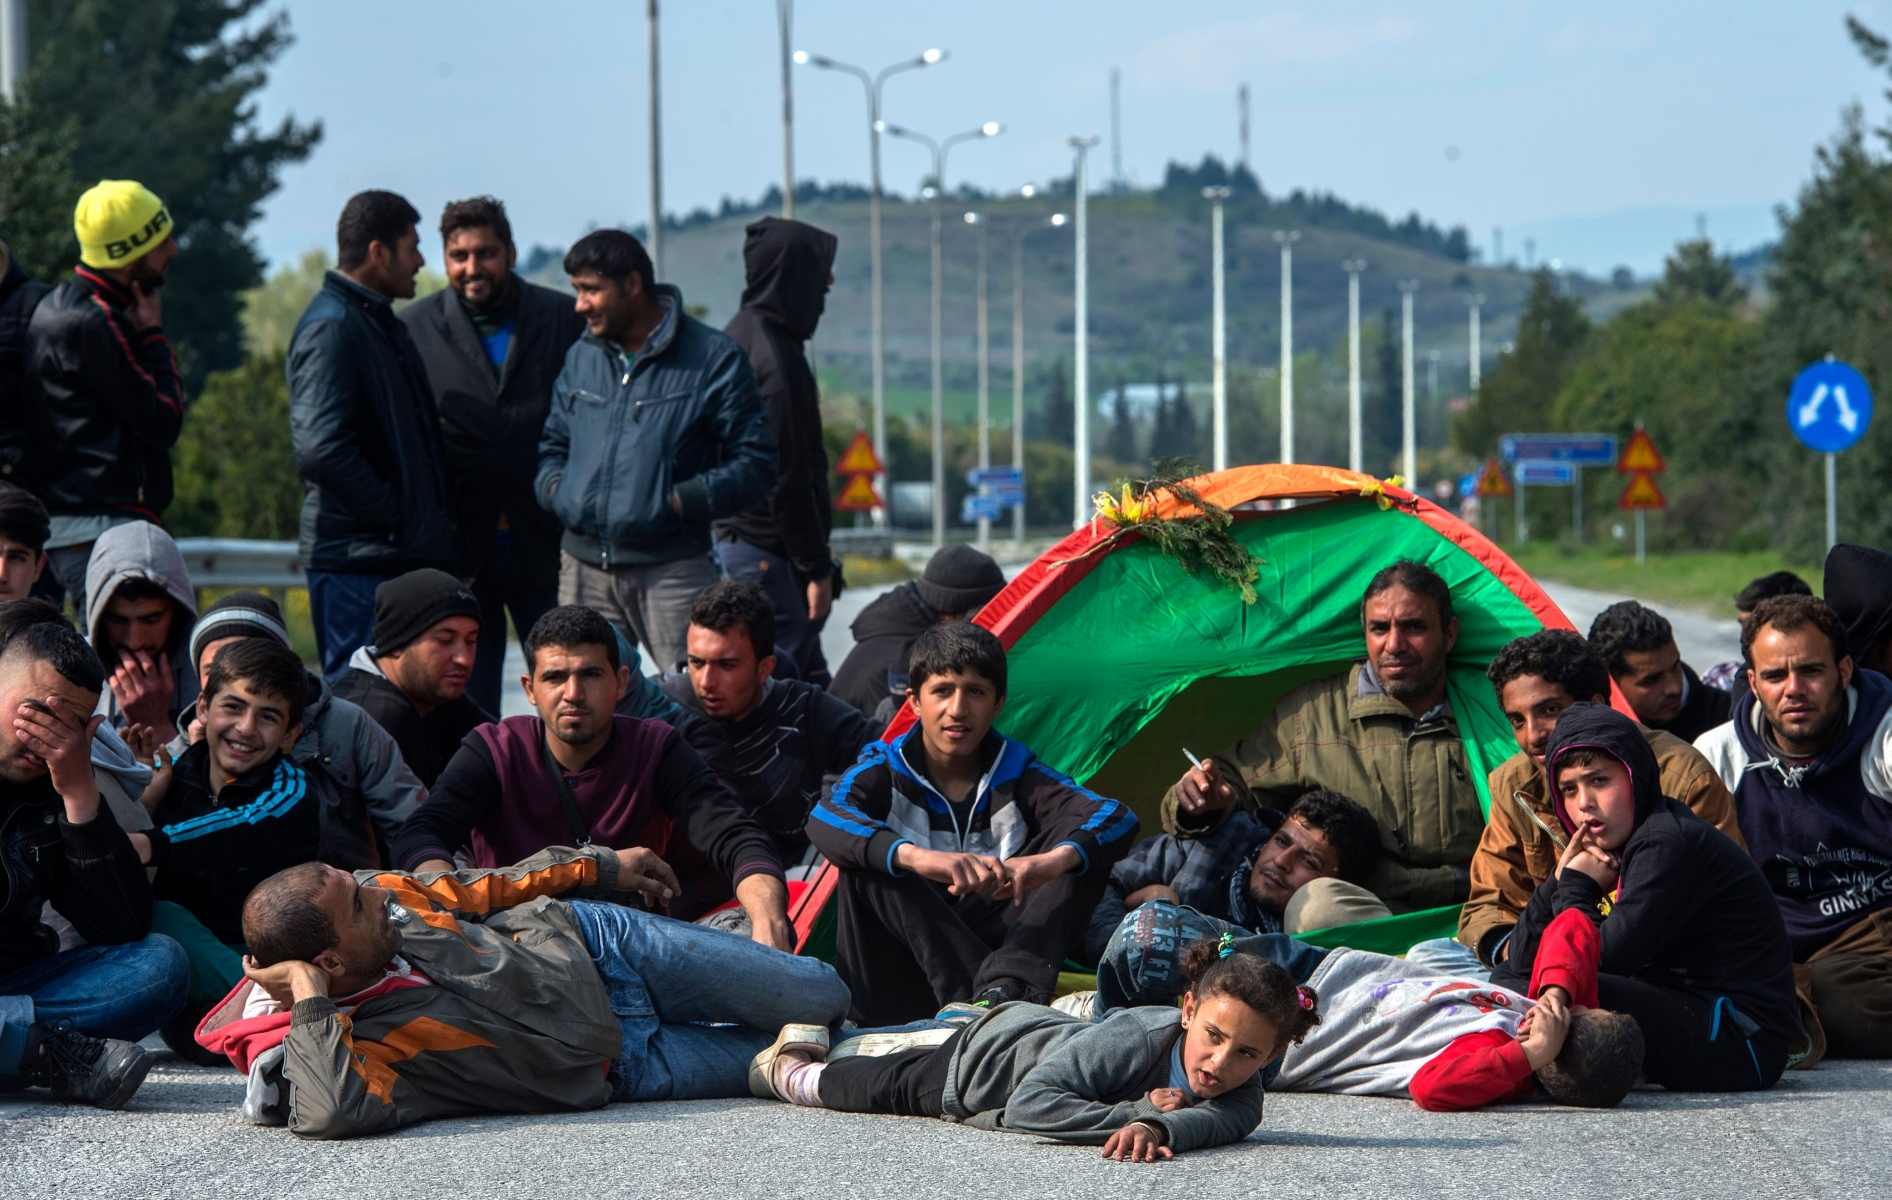 epa05233604 Refugees and migrants blocking the highway to the border crossing of Evzoni during a protest demanding the opening of the borders near the Greek - Macedonian border in northern Greece on 28 March 2016. Migration restrictions along the so-called Balkan route, the main path for migrants and refugees from the Middle East into the European Union, has left thousands of migrants trapped in Greece.  EPA/GEORGI LICOVSKI GREECE REFUGEE MIGRATION CRISIS